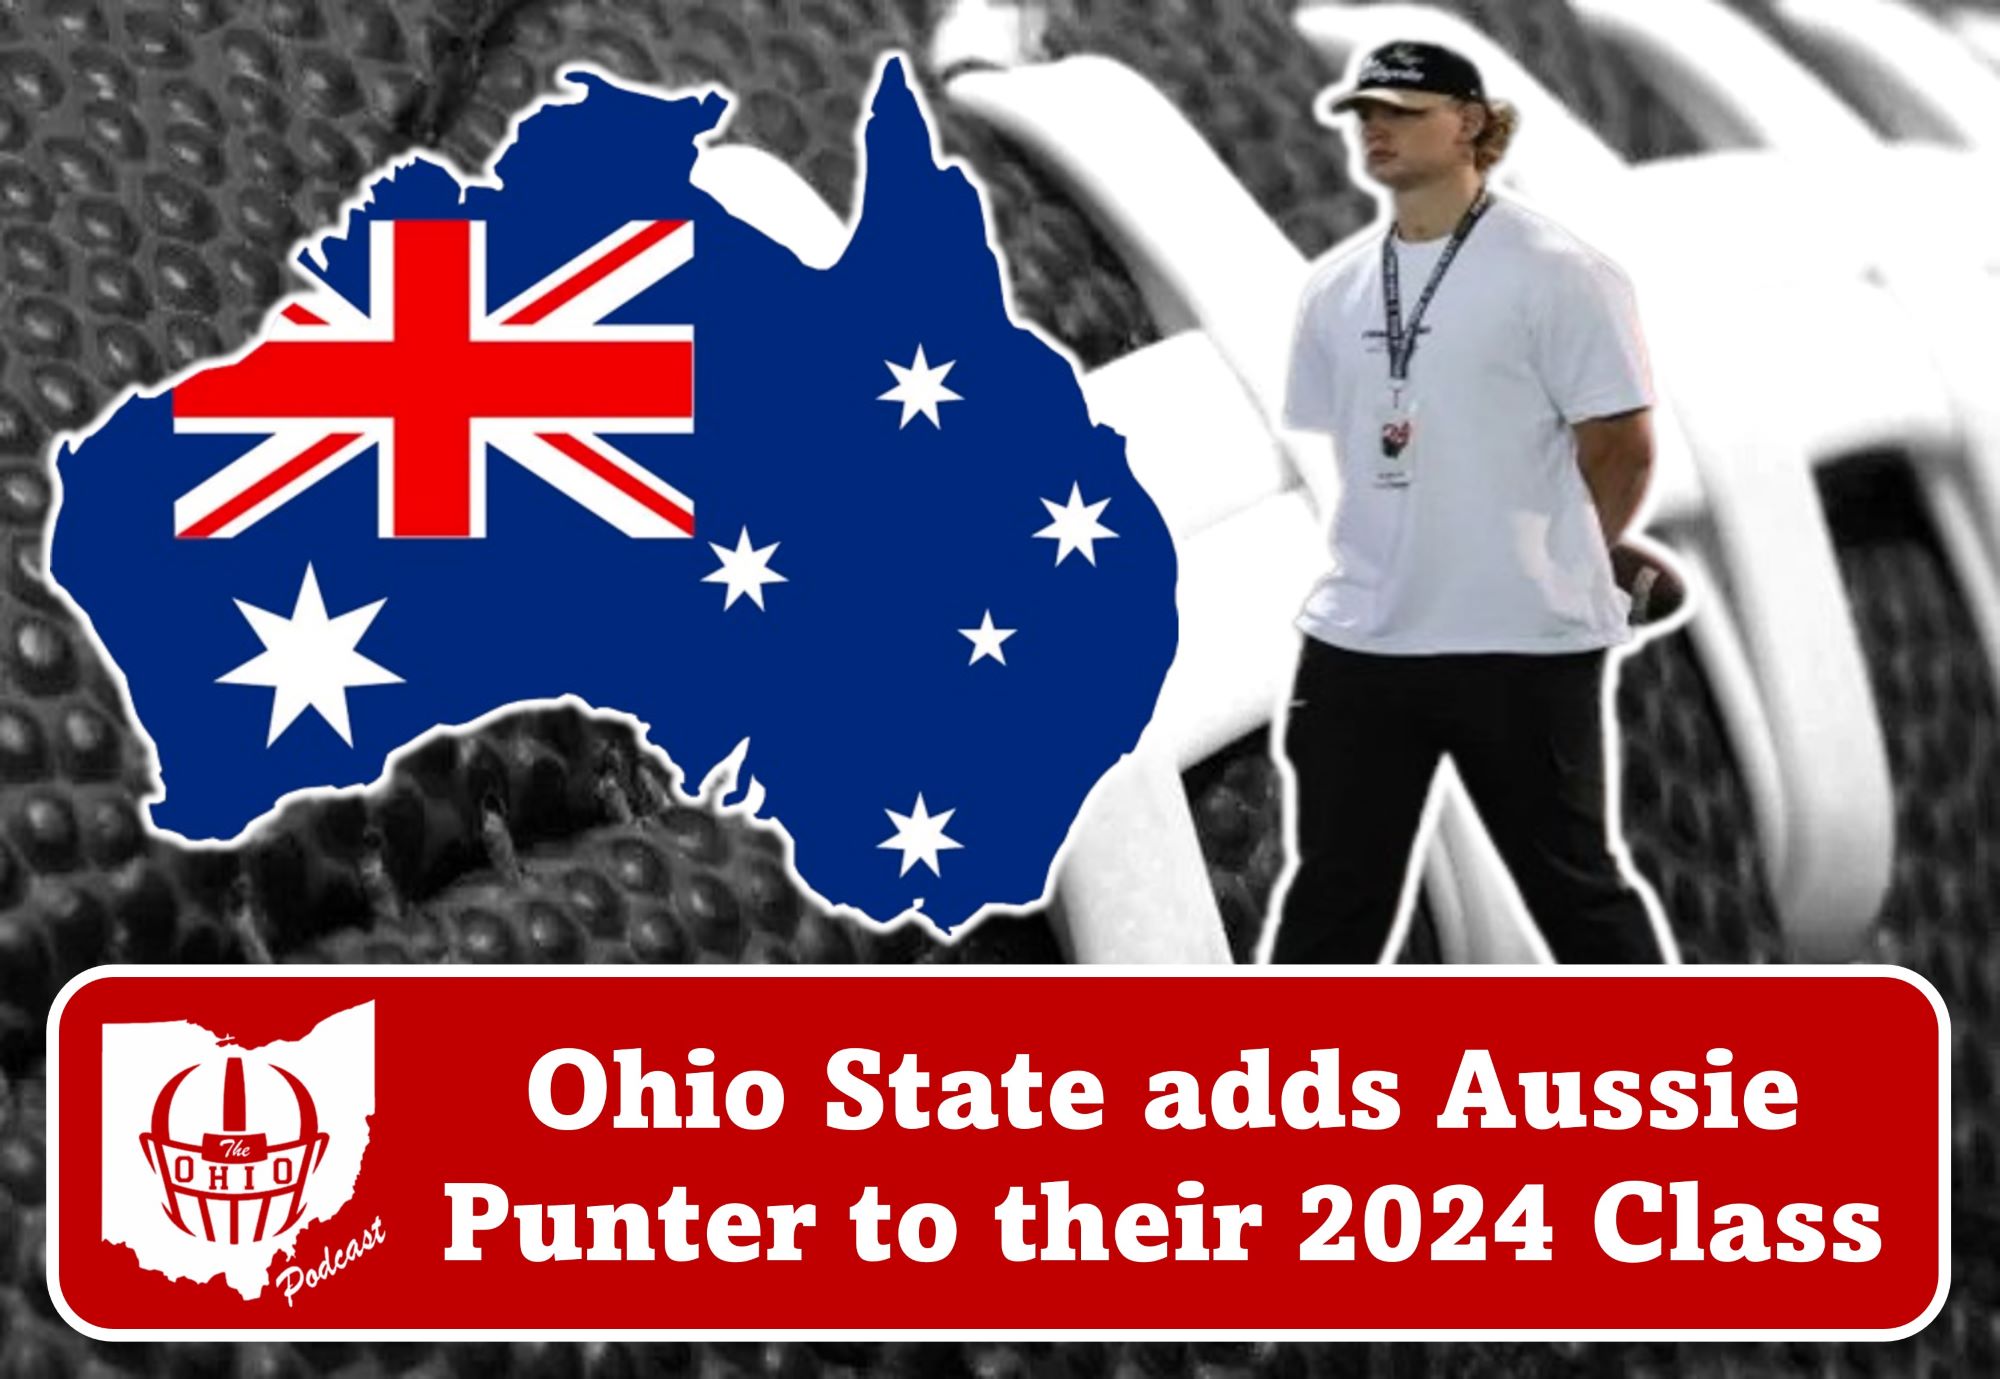 Ohio State adds Aussie Punter to their 2024 Class